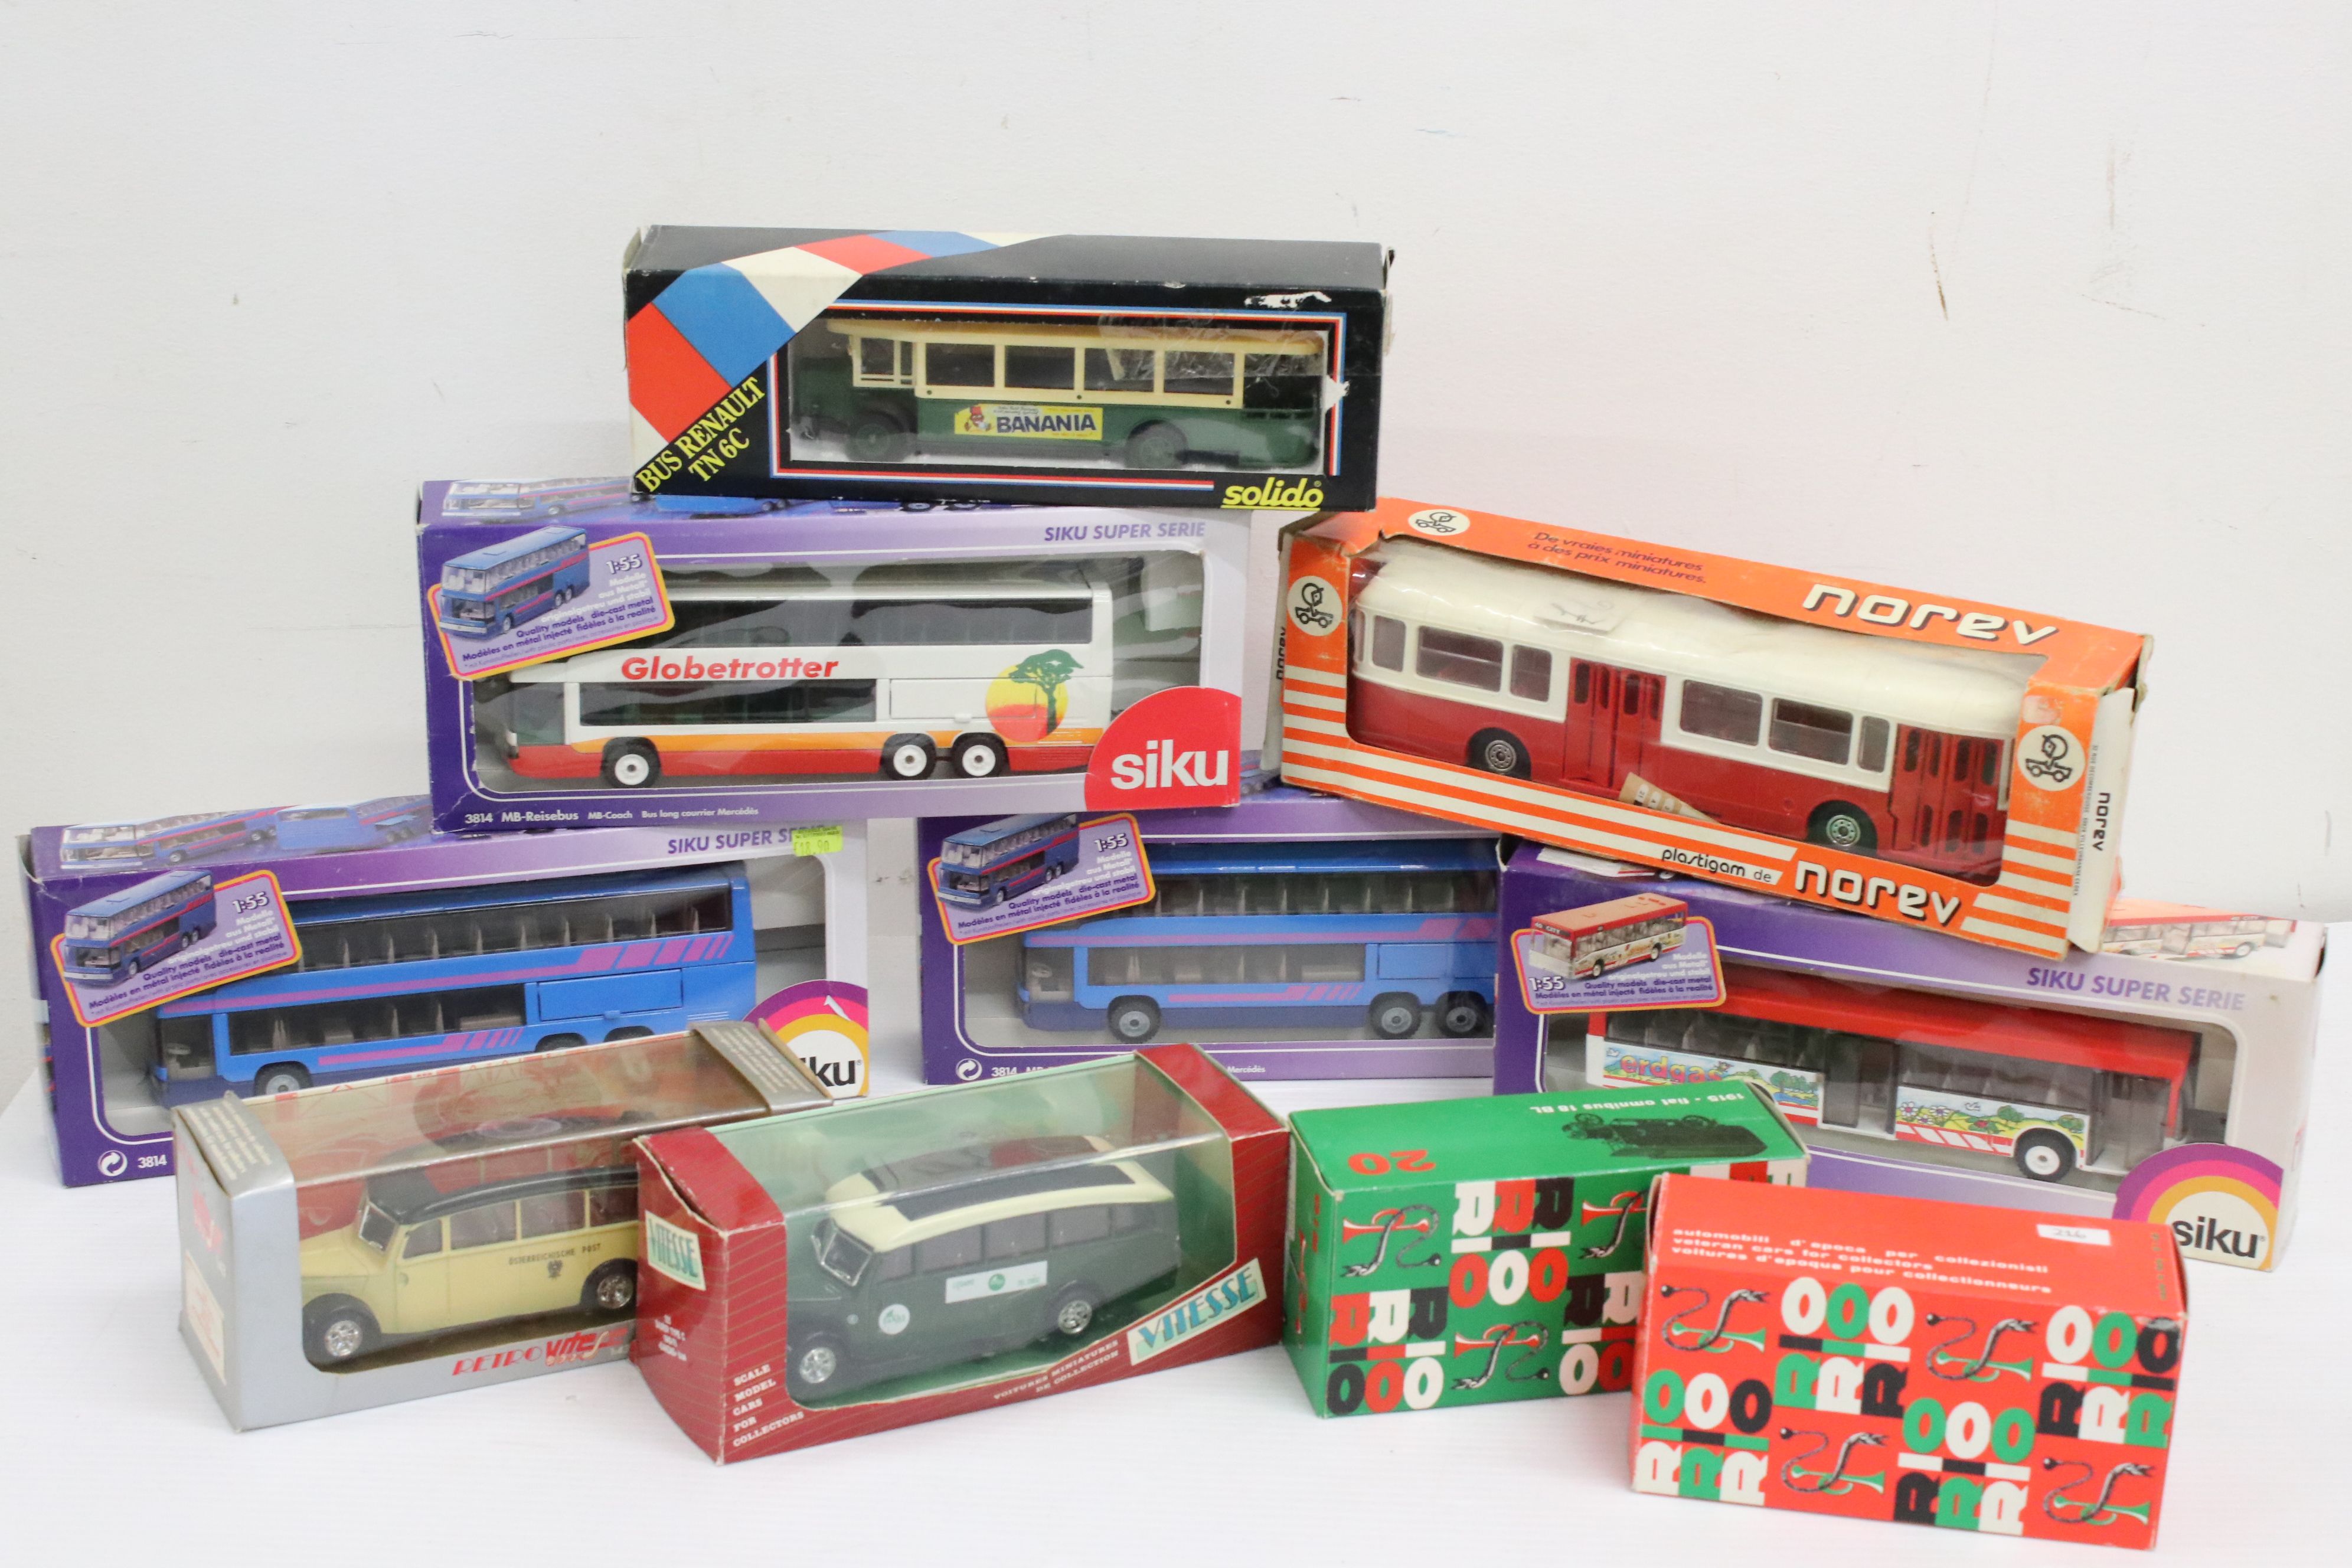 10 x Boxed diecast models to include 4 x Siku featuring 3121 Linienbus and 3 x 3814 MB-Reisebus, 2 x